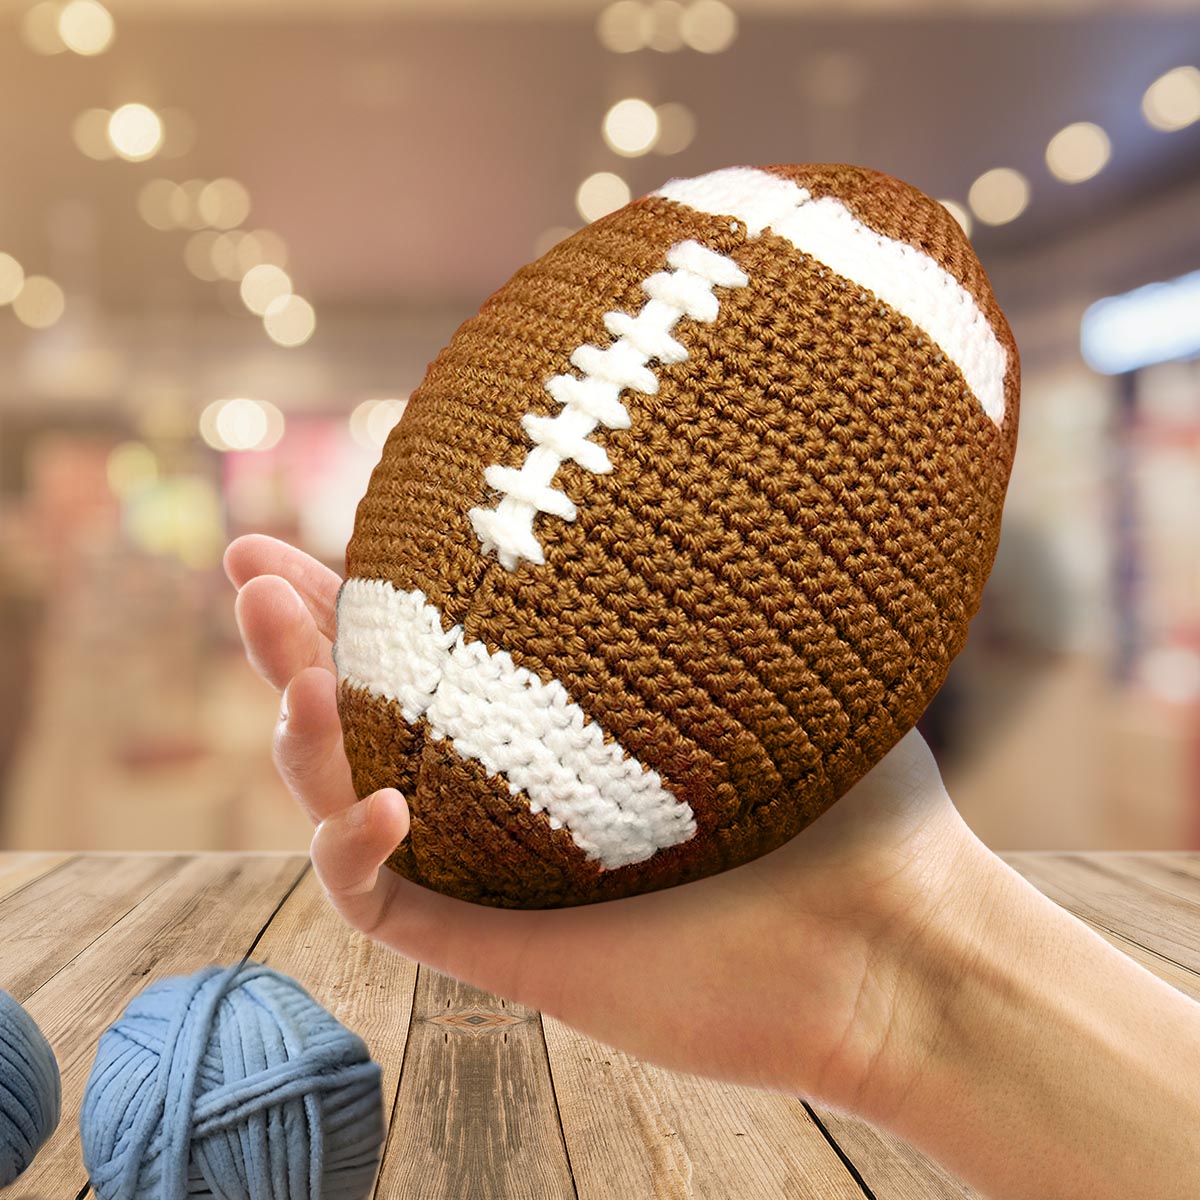 Knitted American Football Ball - Football Hand Knitted Doll